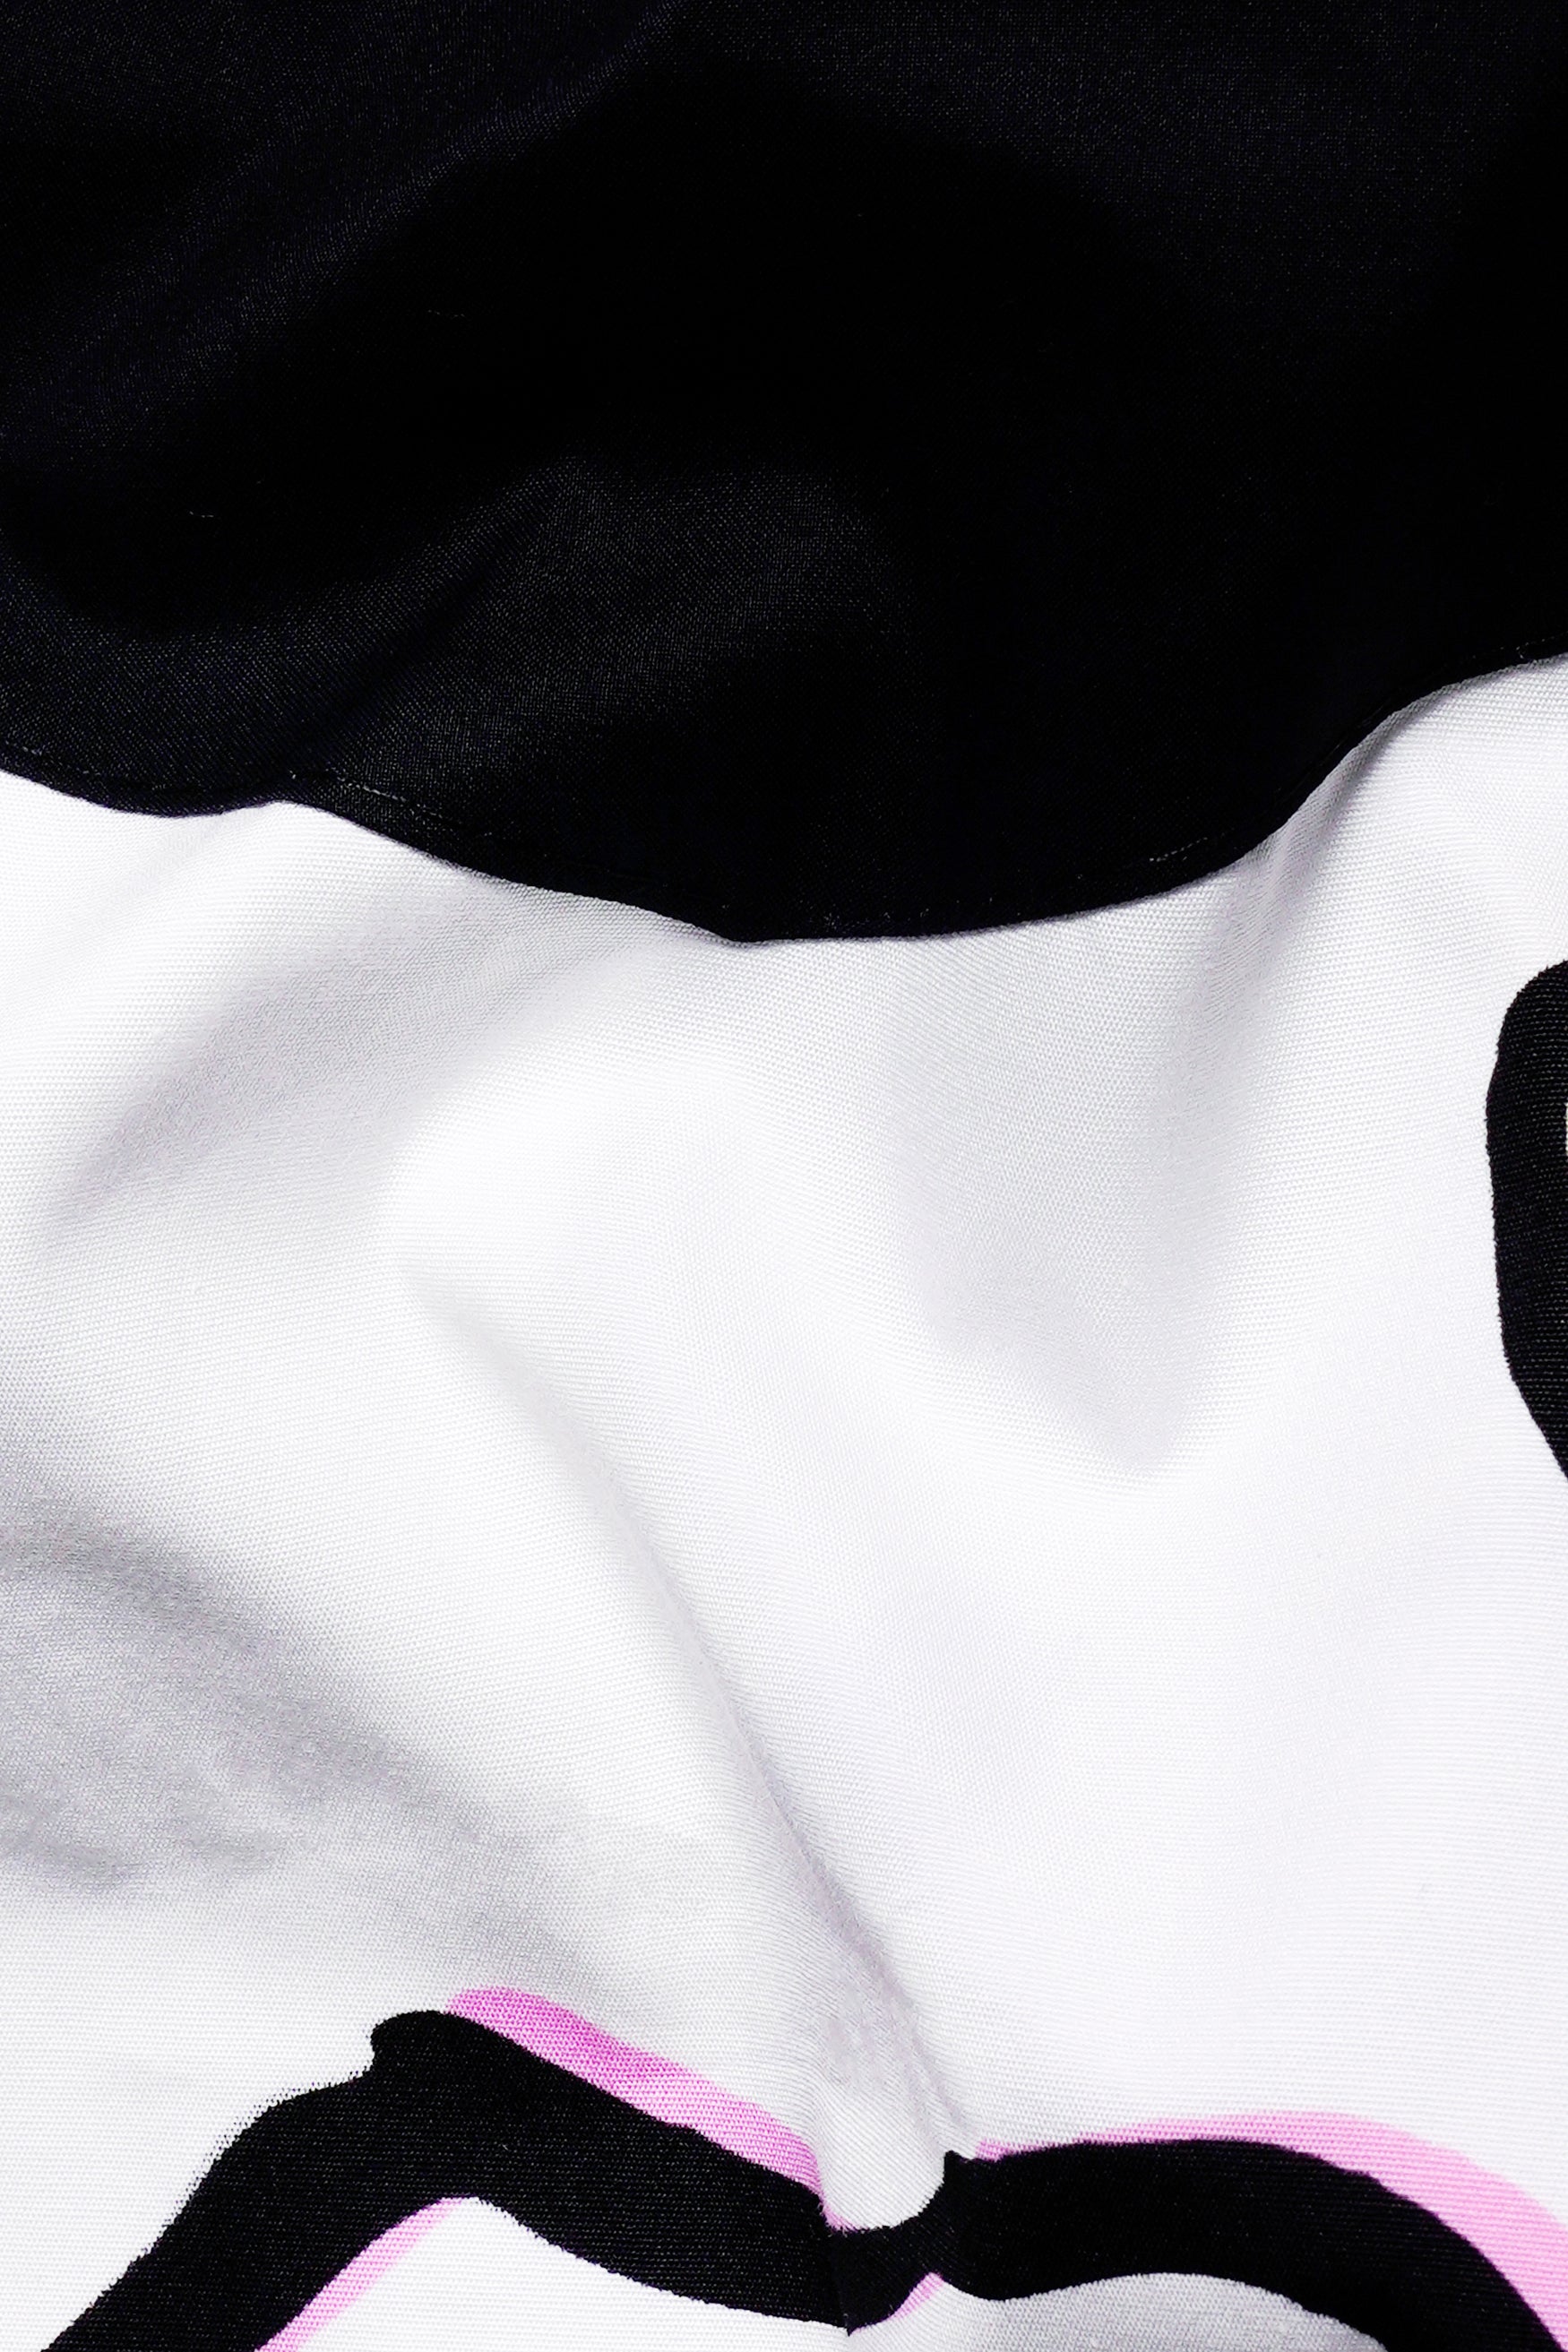 Bright White Faces Printed with Black Cuffs and Collar Premium Cotton Shirt